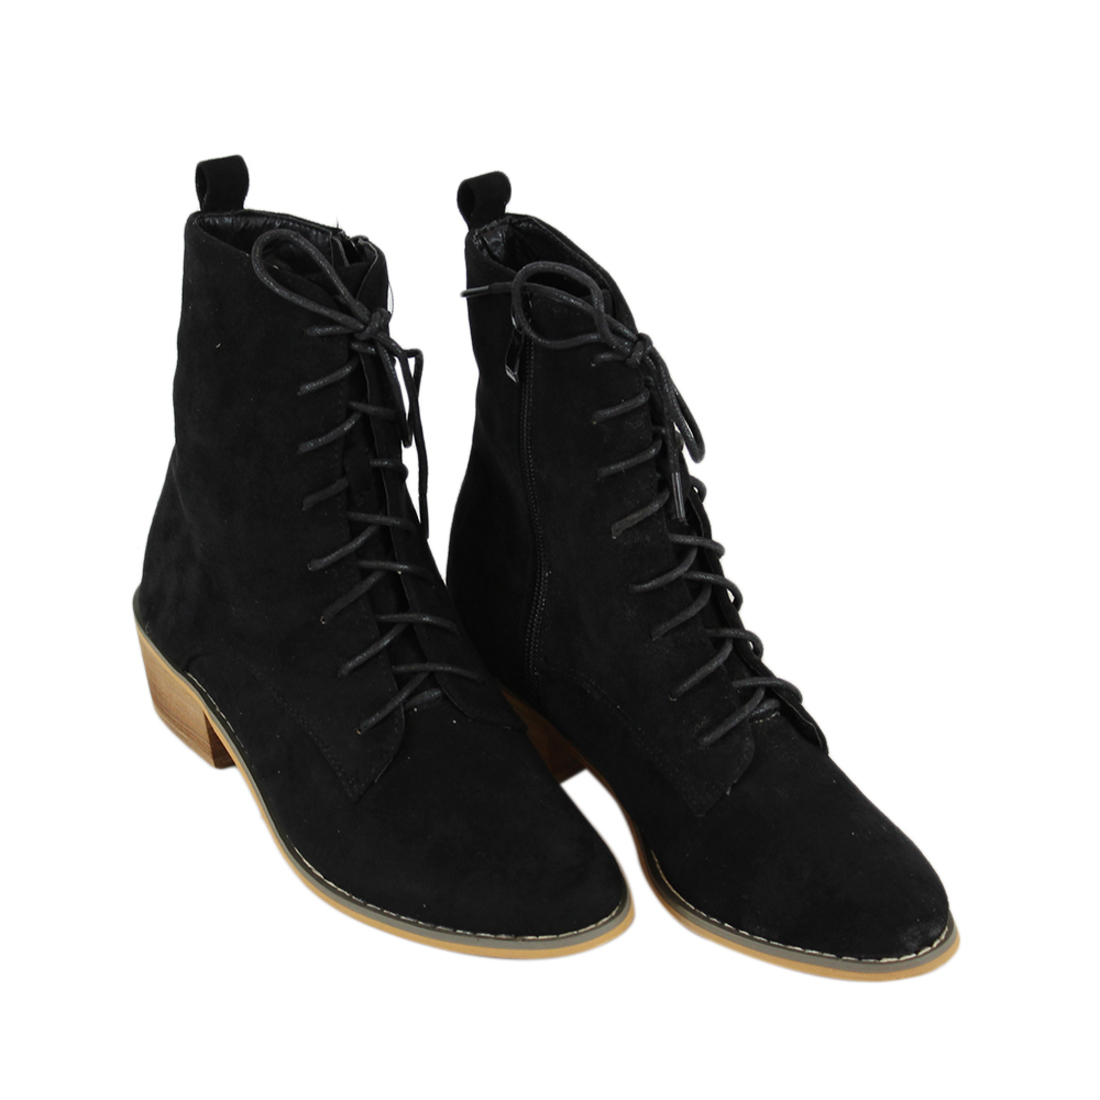 * Suede leather lace-up flat ankle boots